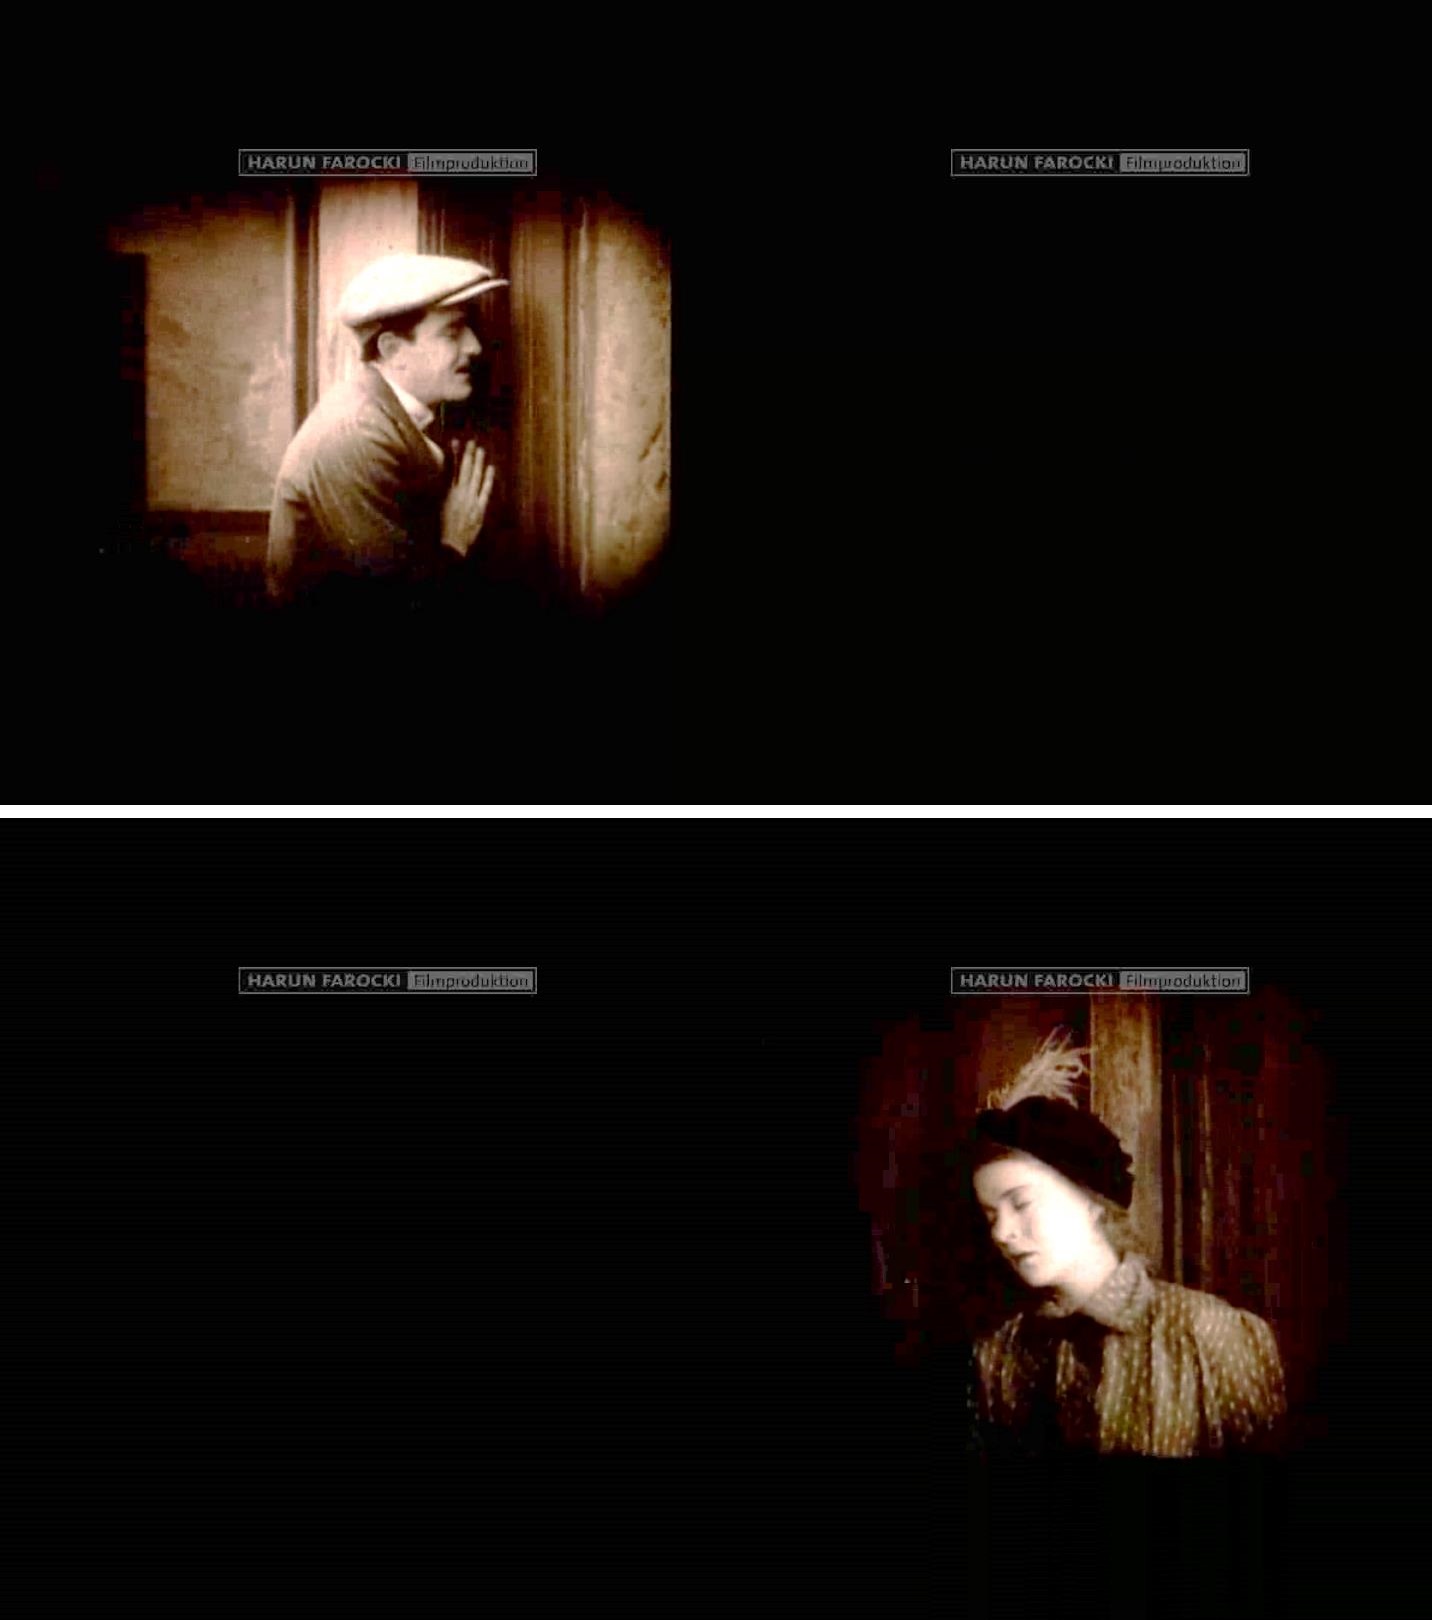 Figs. 5-6. Lovers on two sides of a door, two ends of a cut, in   Zur Bauweise des Films bei Griffith / On Construction of Griffith’s Films  (Harun Farocki, 2006), two-channel video. Courtesy Antje Ehmann and Harun Farocki Filmproduktion. Film stills © Harun Farocki GbR, Berlin. 